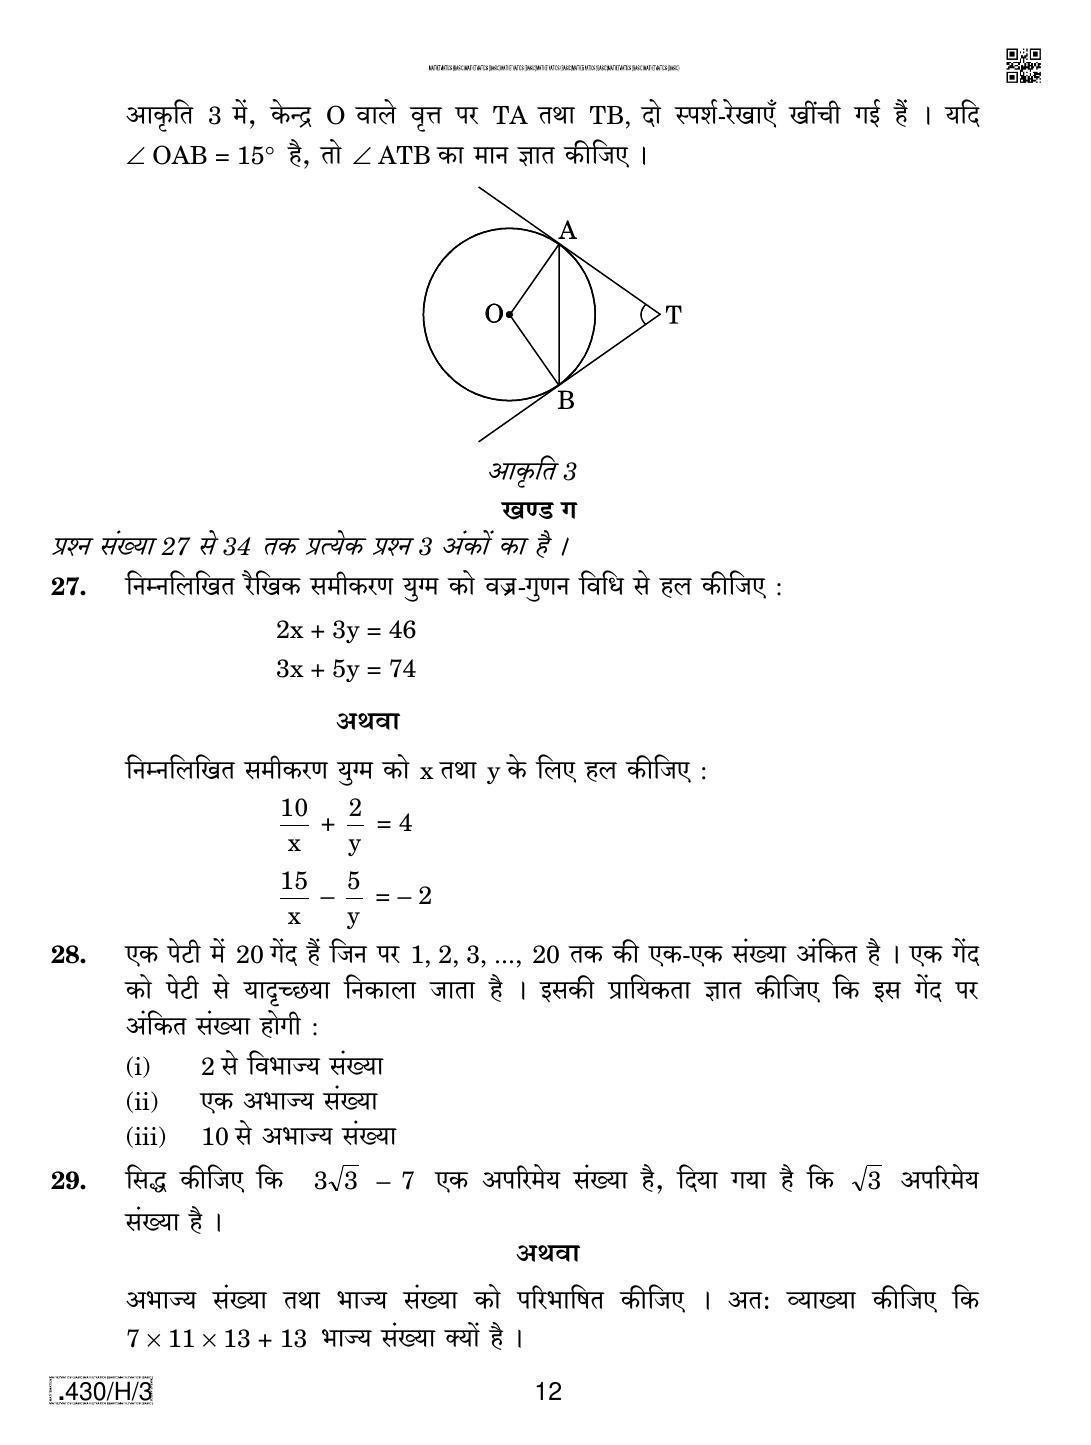 CBSE Class 10 430-C-3 - Maths (Basic) 2020 Compartment Question Paper - Page 12